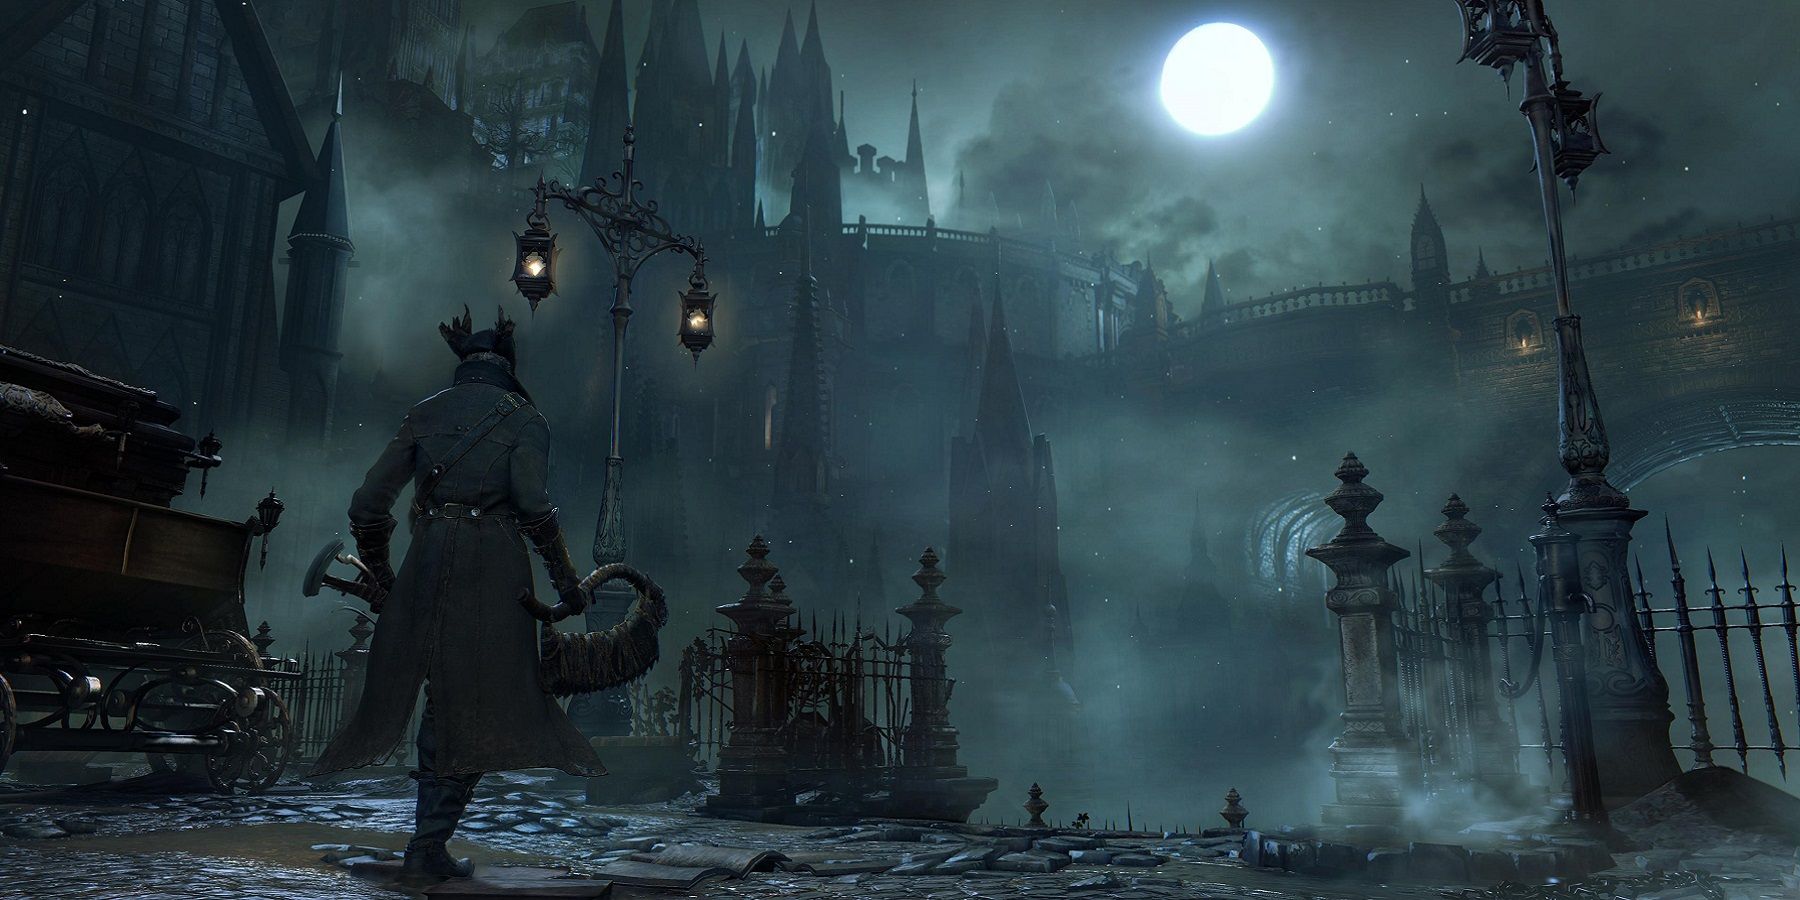 Image from Bloodborne showing the Hunter in Yharnam at night.